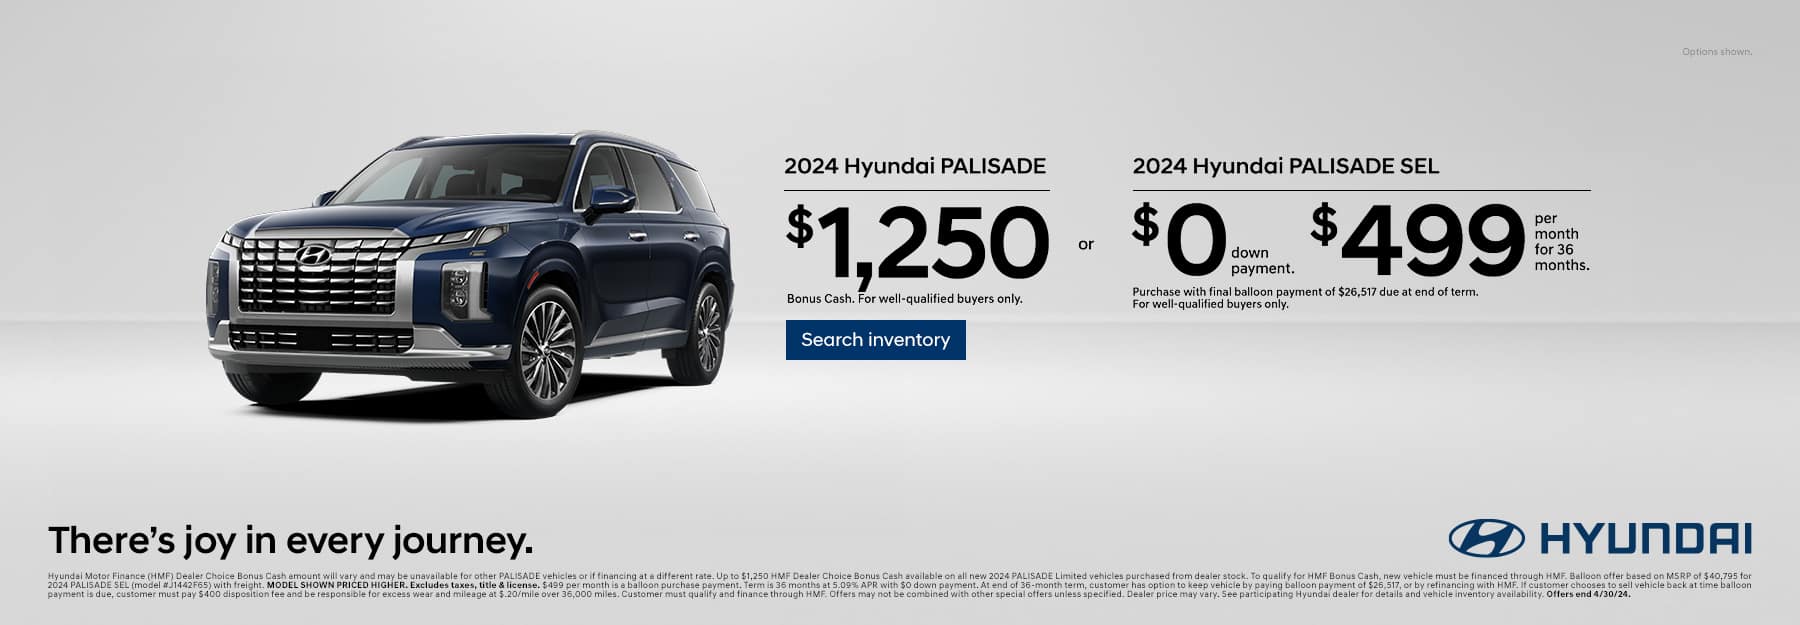 Drive the New 2024 Tucson SE for $349/mo for 39 mo lease with only $1 down -or- Purchase the New 2024 Hyundai Tucson and choose 2.99% APR for 60 months or $1500 HMF Bonus Cash | Drive the New 2023 Santa Fe SE for only $409/mo for 39 mo lease with only $1 down -or- Purchase the New 2023 Hyundai Santa Fe SEL and choose $3000 HMF Bonus Cash or 2.99 APR for 60 months + $1500 HMF Bonus Cash